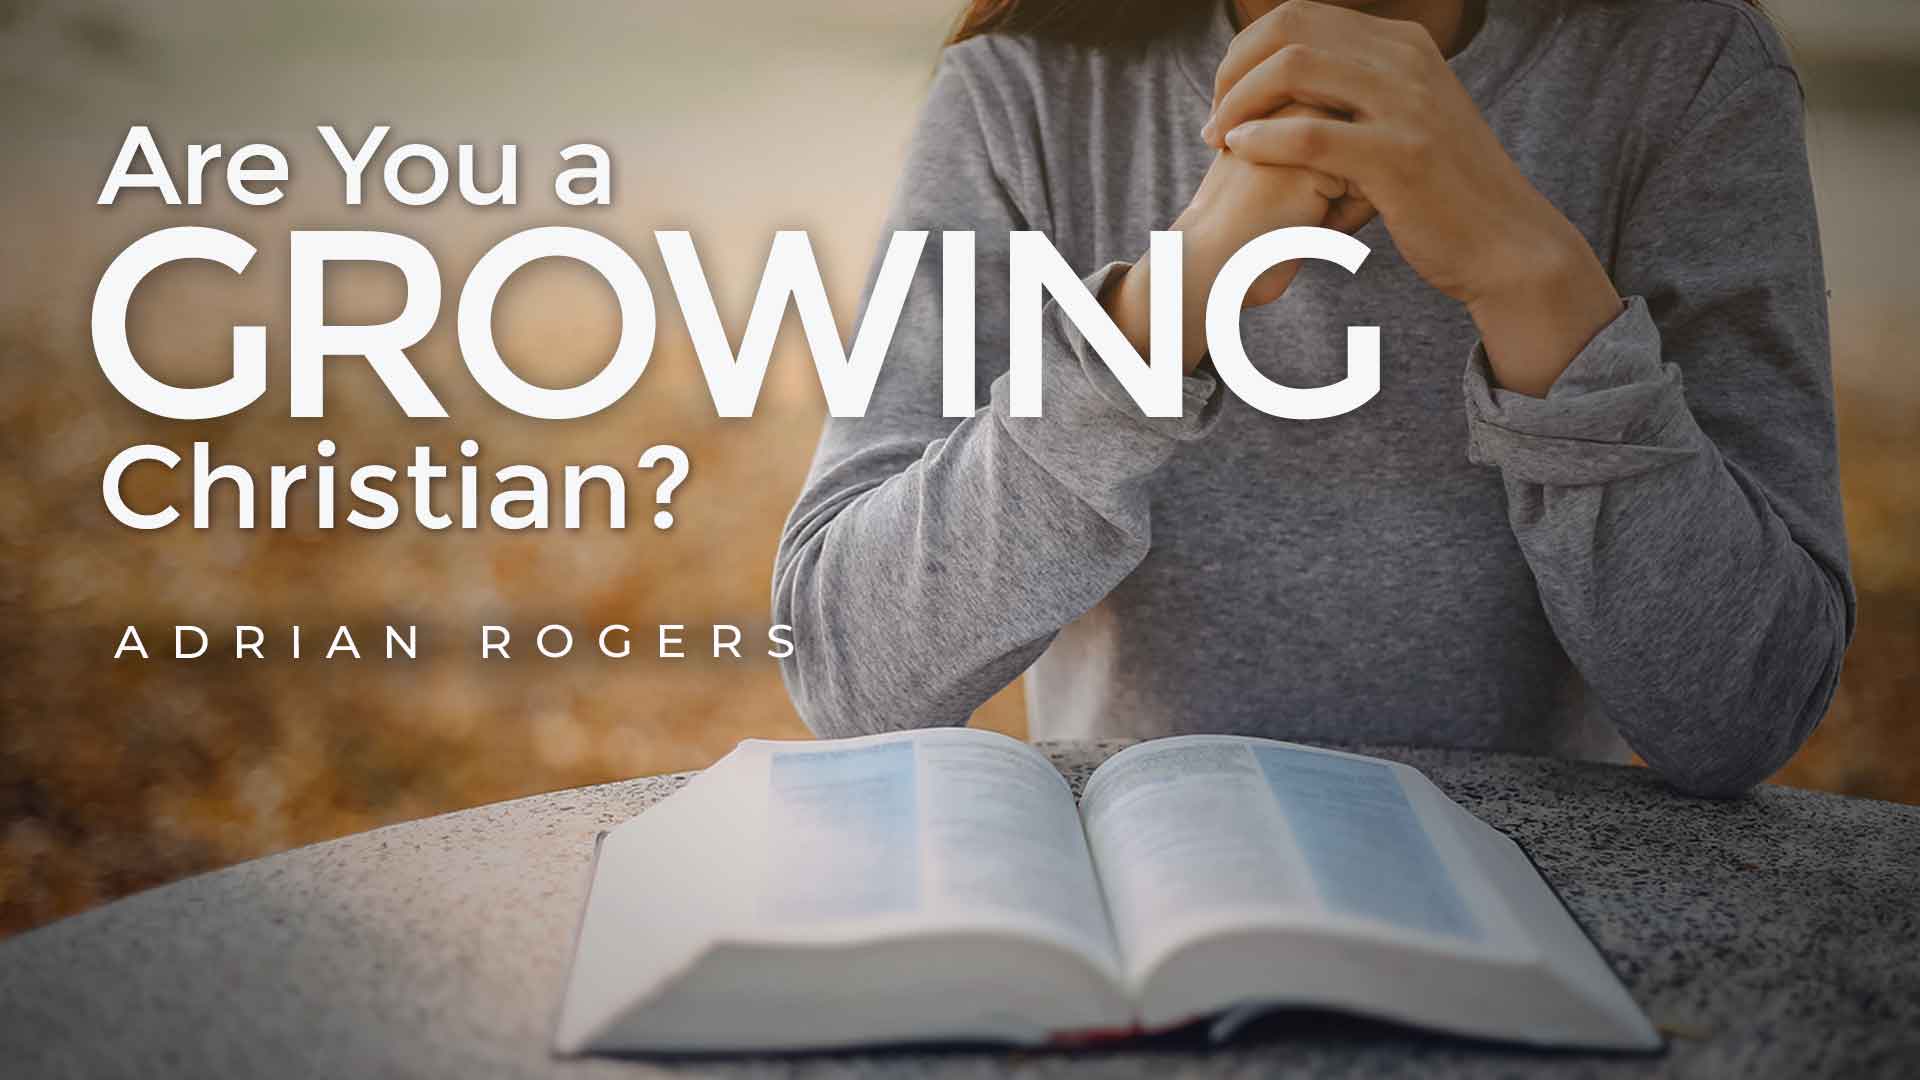 Are You a Growing Christian 1920x1080